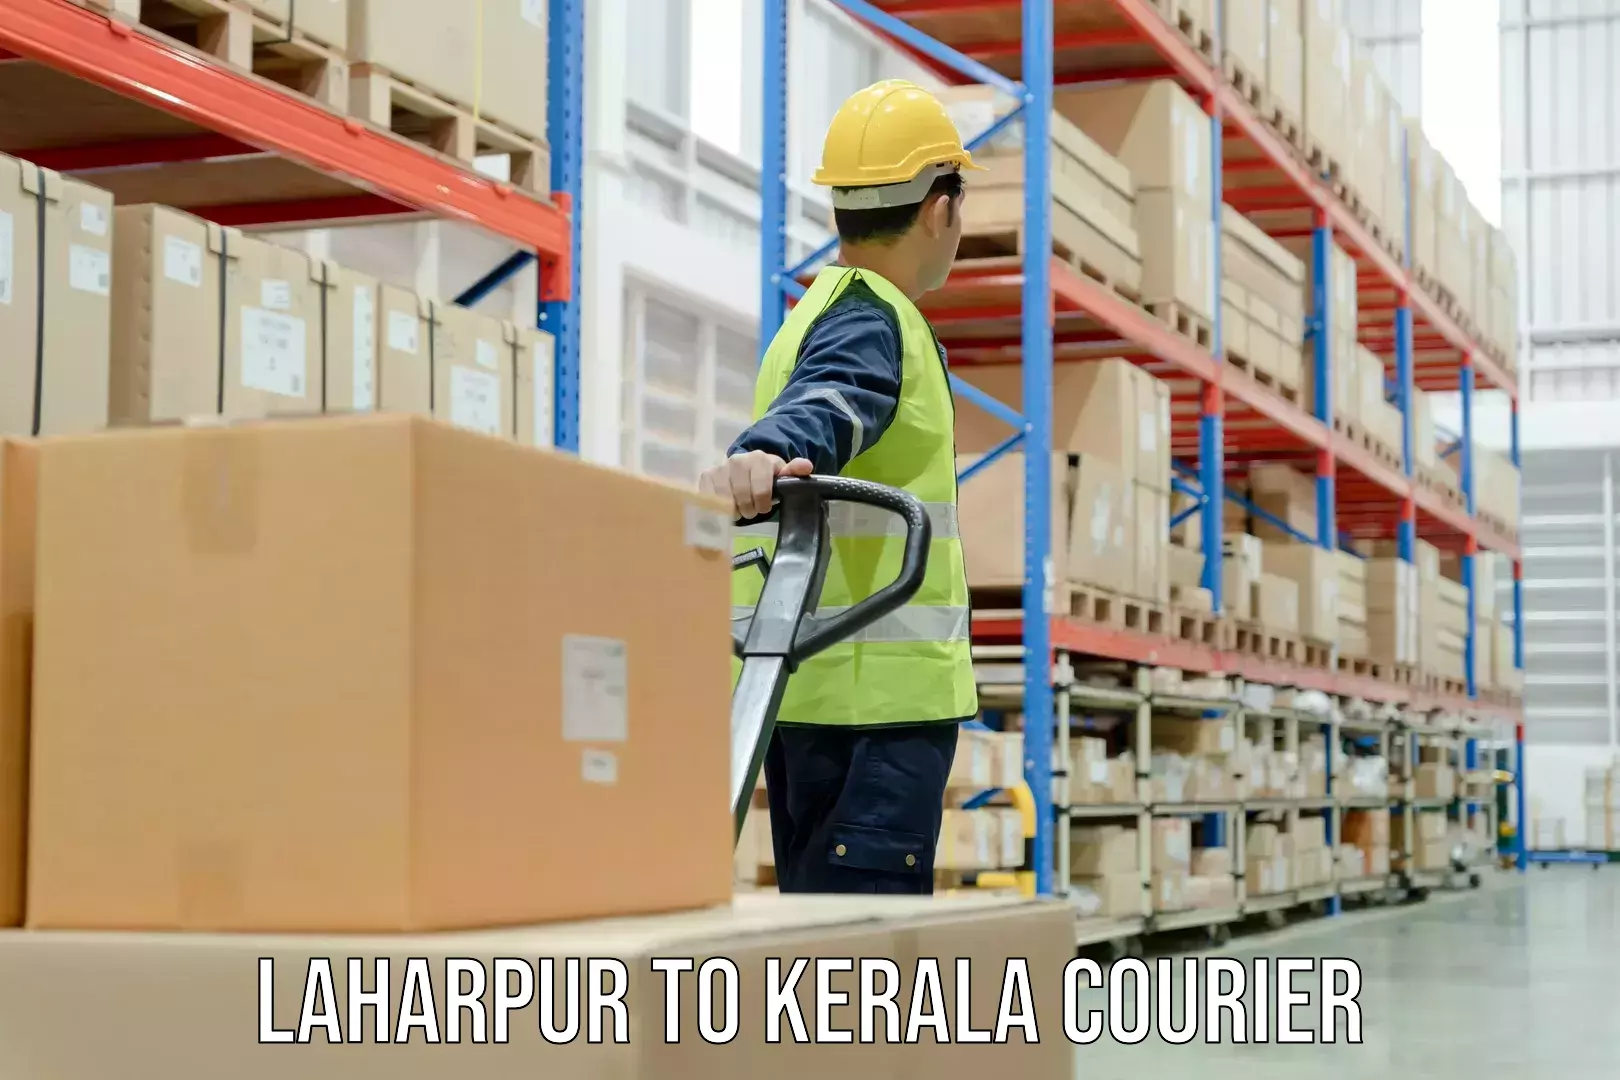 State-of-the-art courier technology Laharpur to Alakode